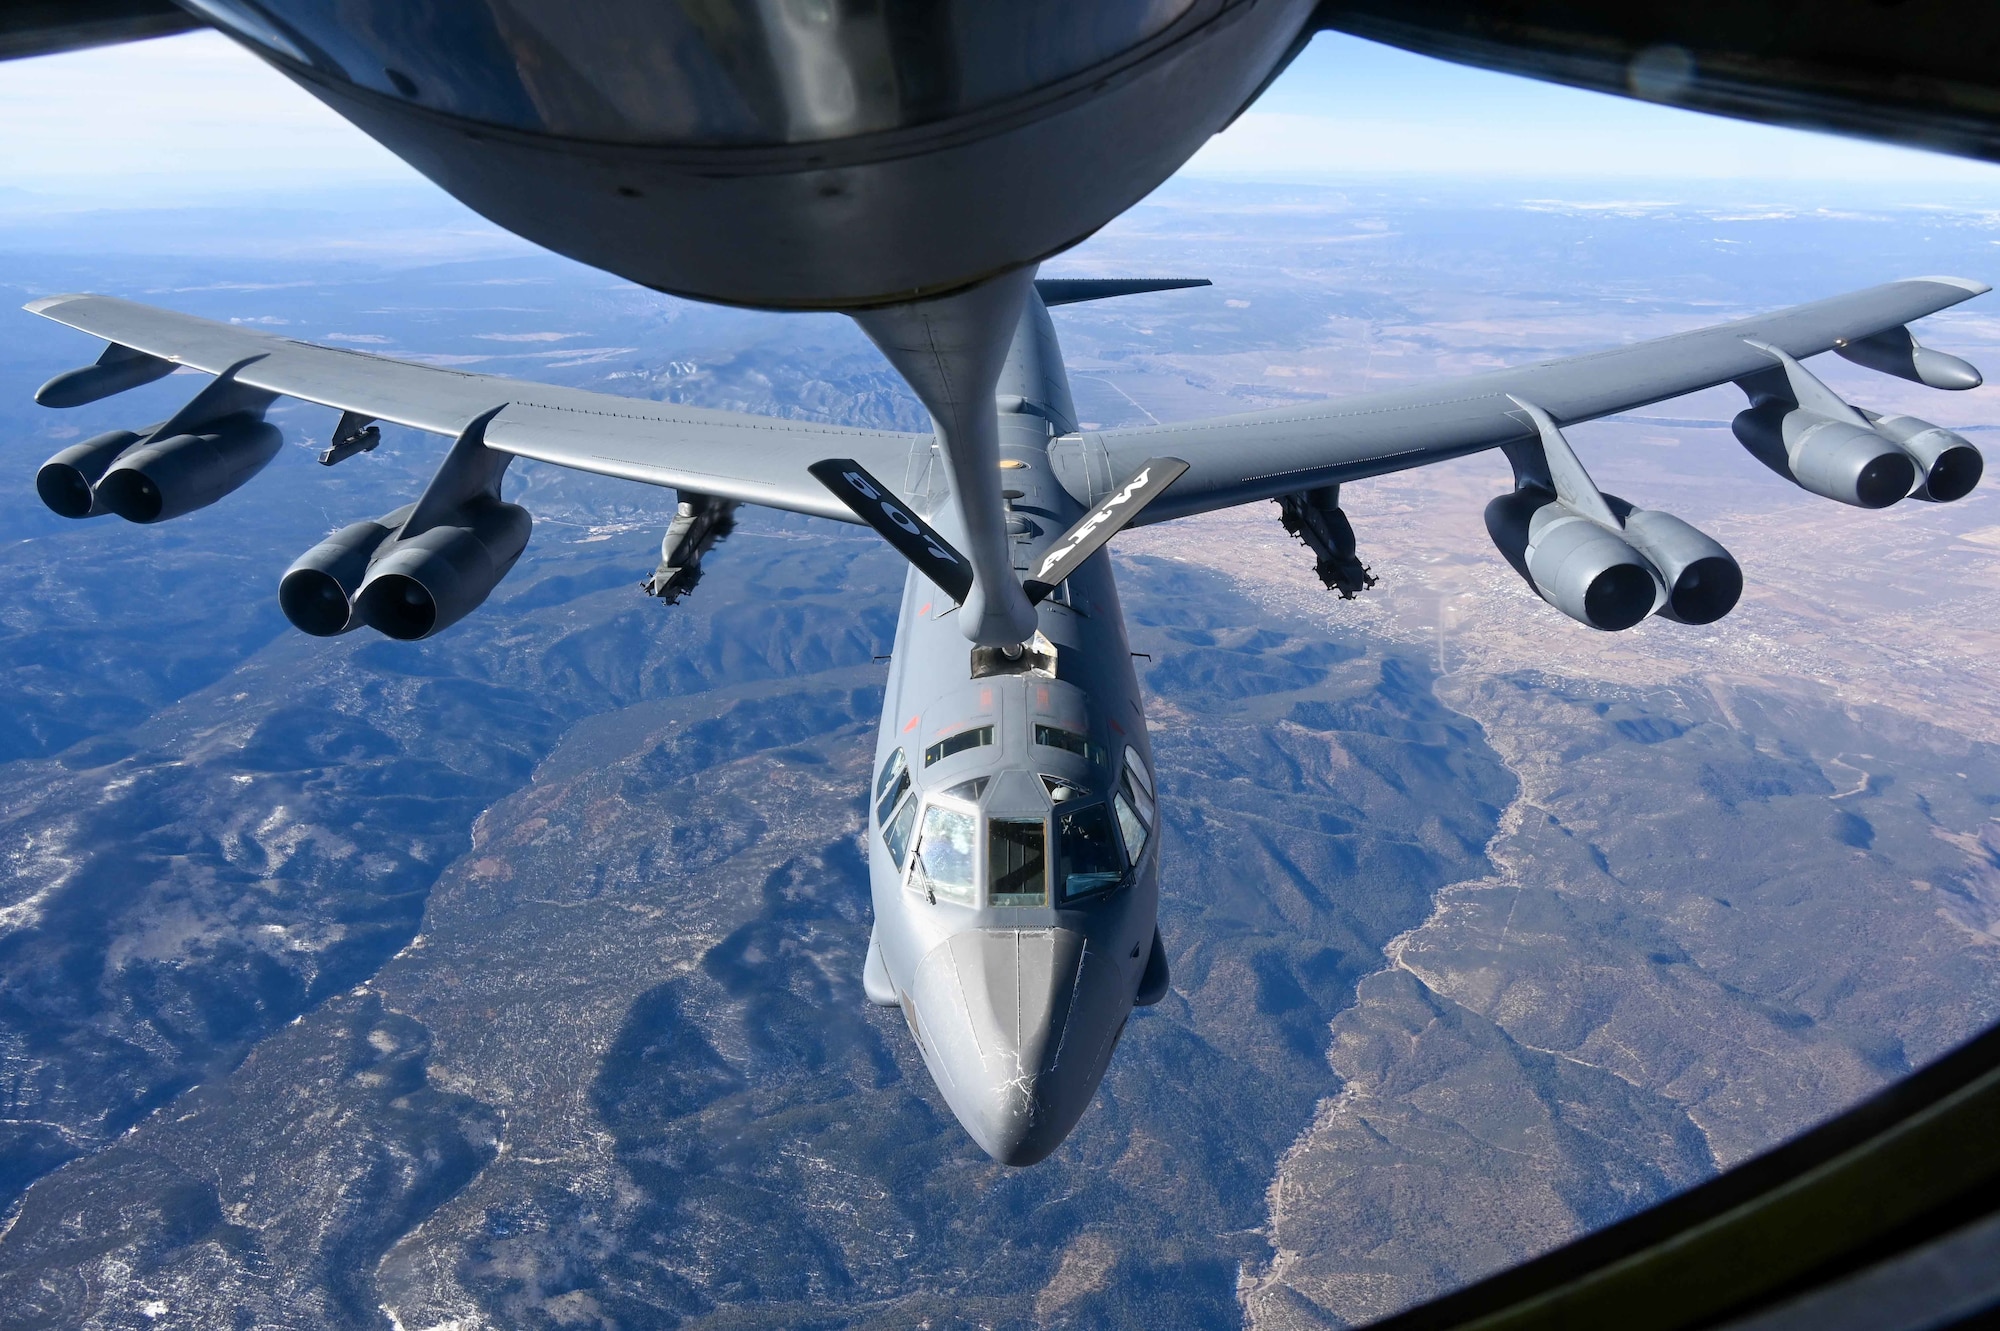 A B-52 Stratofortress assigned to the 96th Bomb Squadron Barksdale Air Force Base, Louisiana, refuels with a KC-135 Stratotanker assigned to the 465th Air Refueling Squadron, Tinker AFB, Oklahoma, above the Rocky Mountains, Dec. 13, 2021. Aerial refueling allows aircraft to travel vast distances without landing to bring airpower anytime, anywhere around the world. (U.S. Air Force photo by 2nd Lt. Mary Begy)